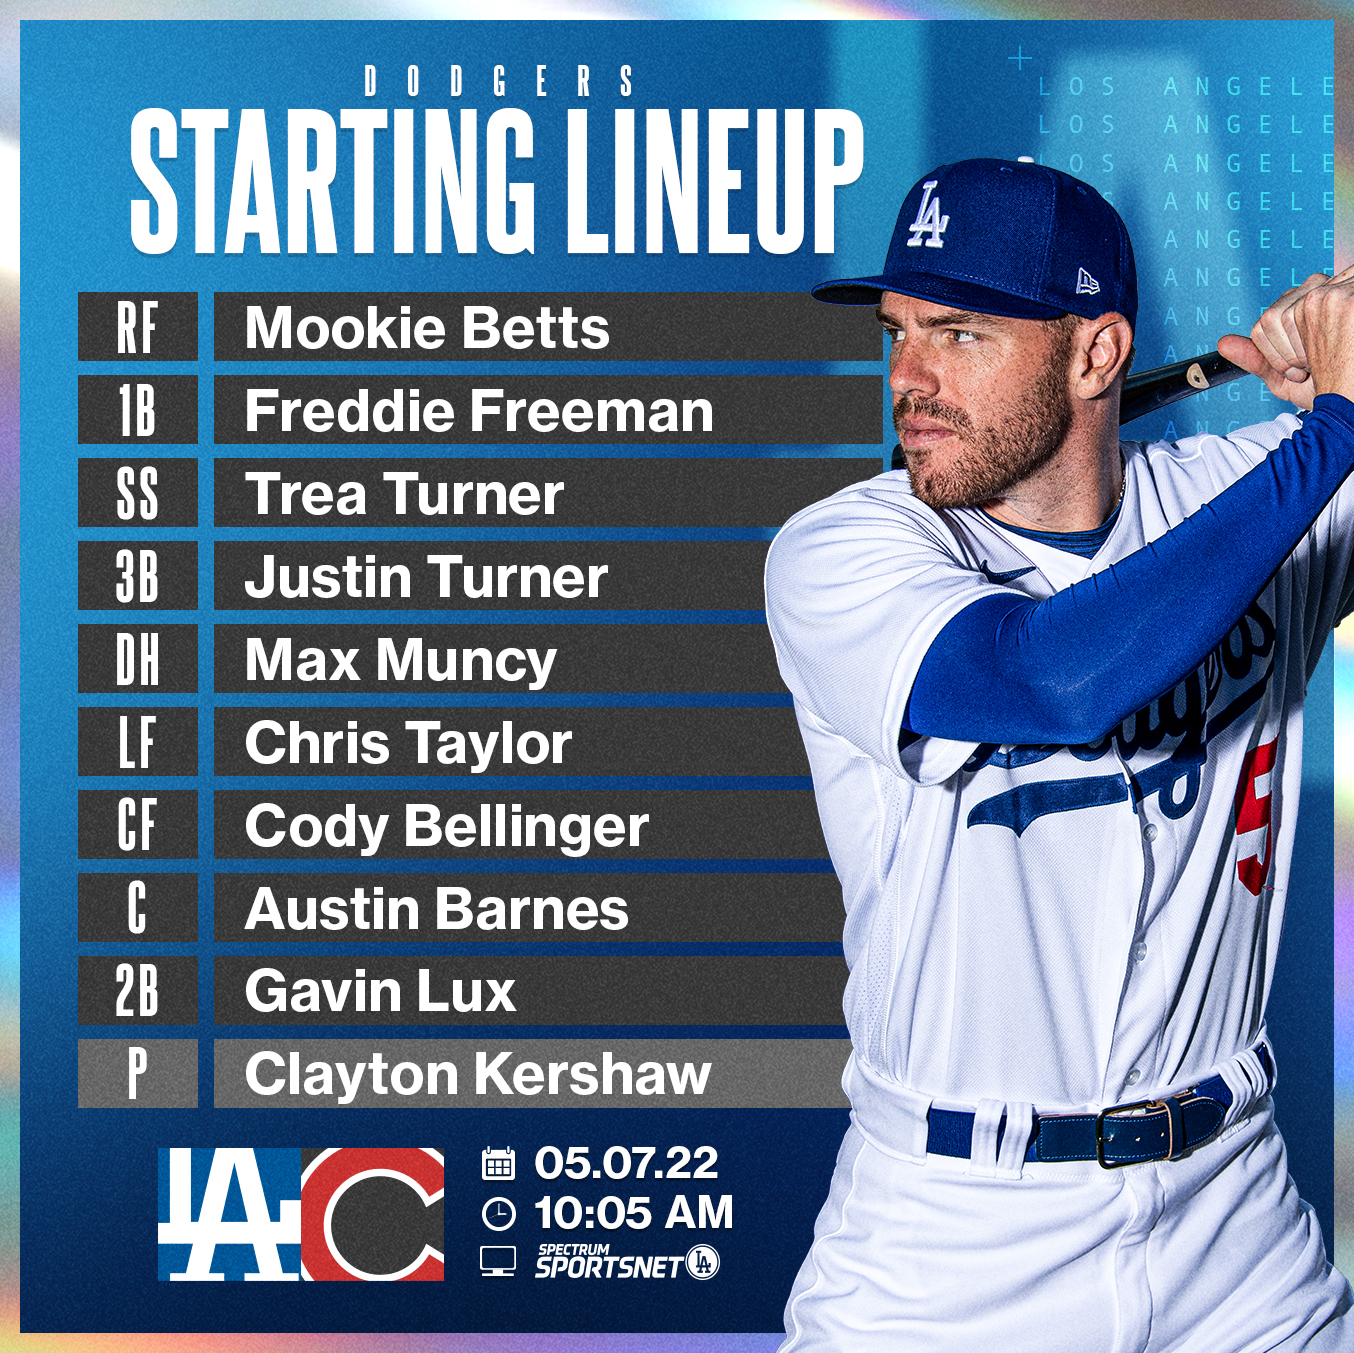 LA on Twitter "Today’s Dodgers starting lineup for Game 1